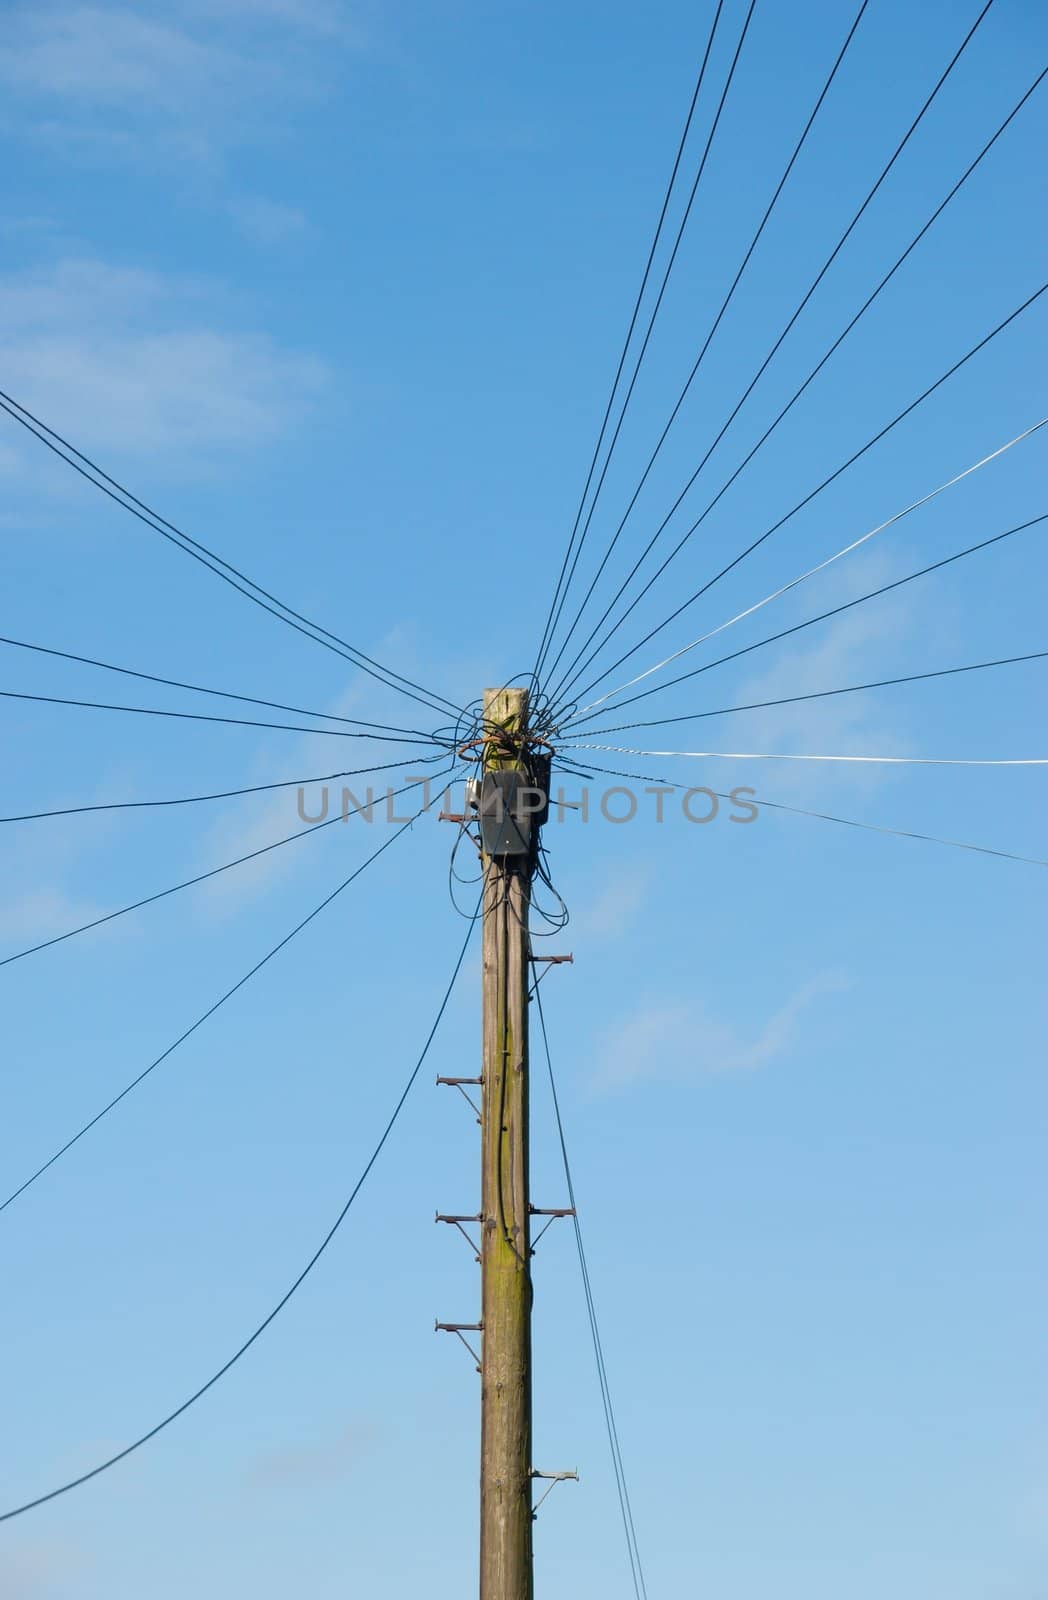 Telegraph pole with radiating telephone cables against a blue sky